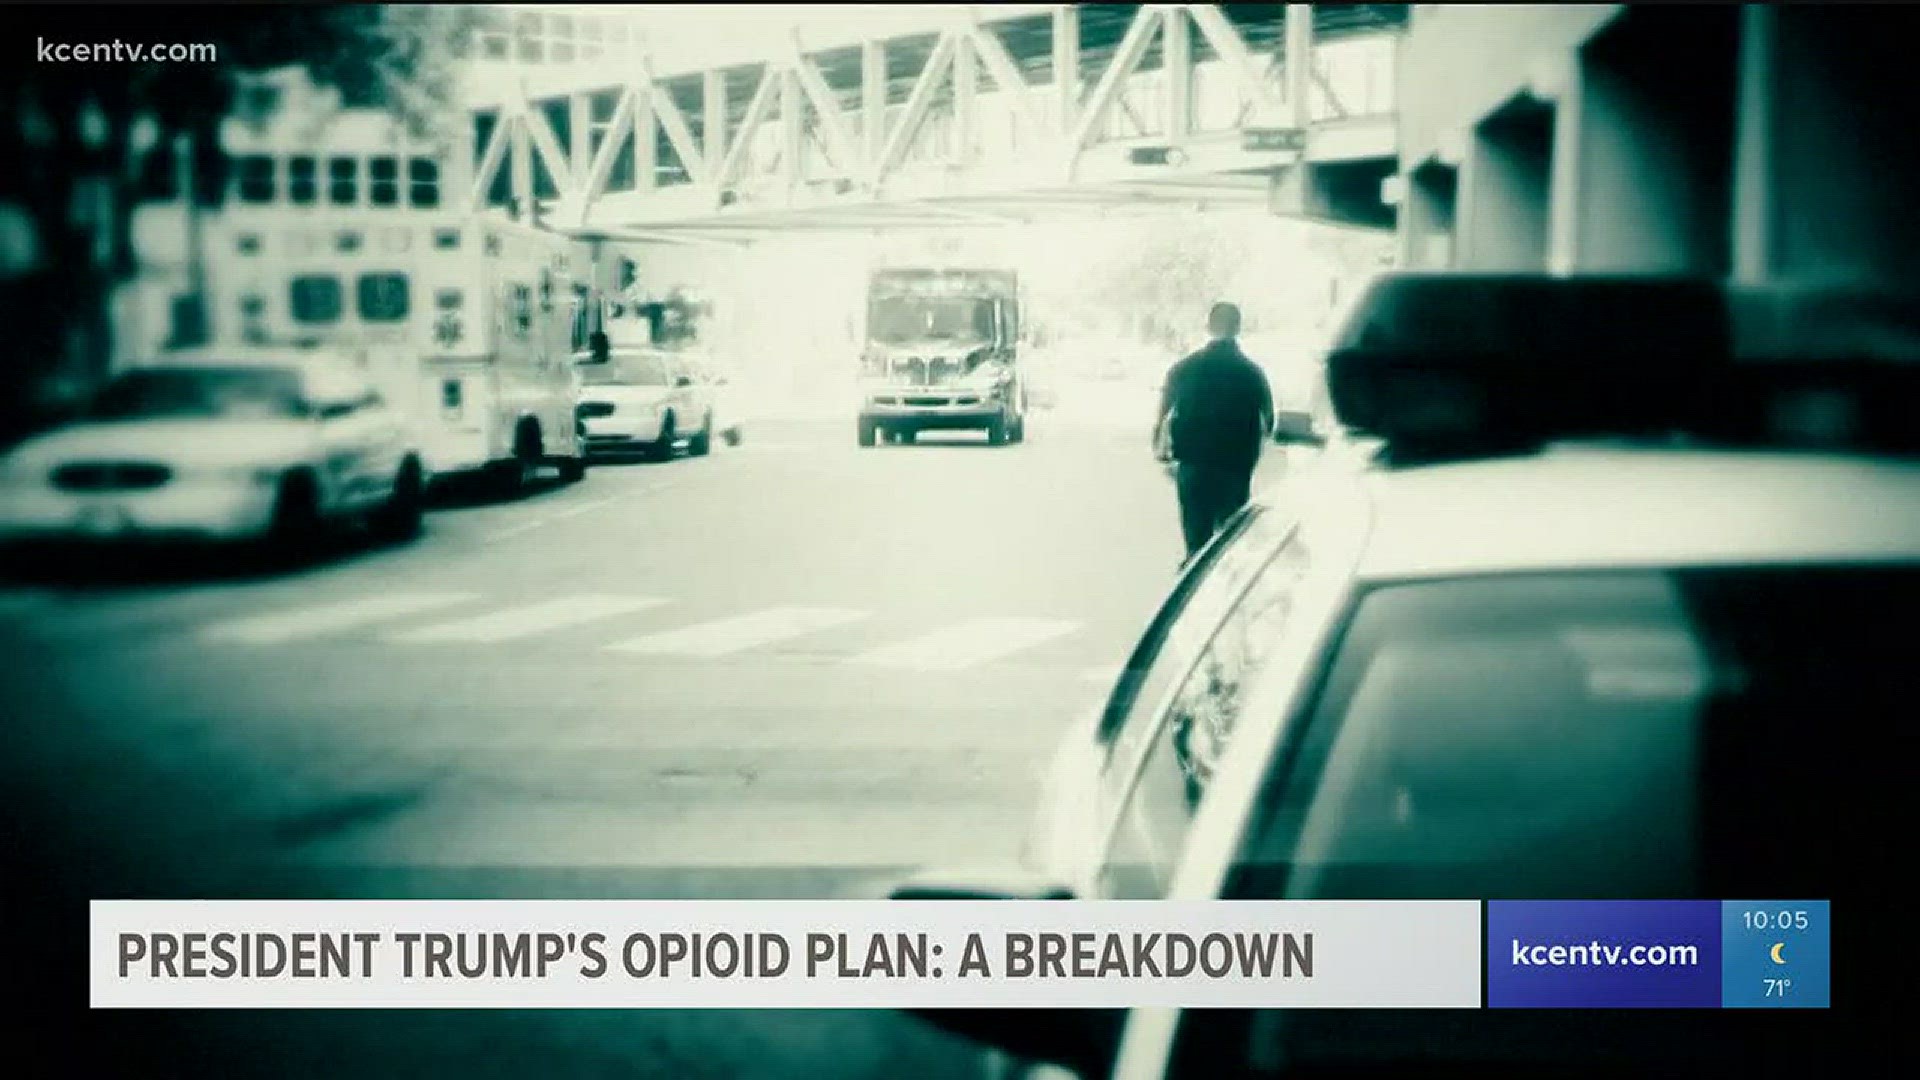 Breaking down the President's plan to handle the opioid problem